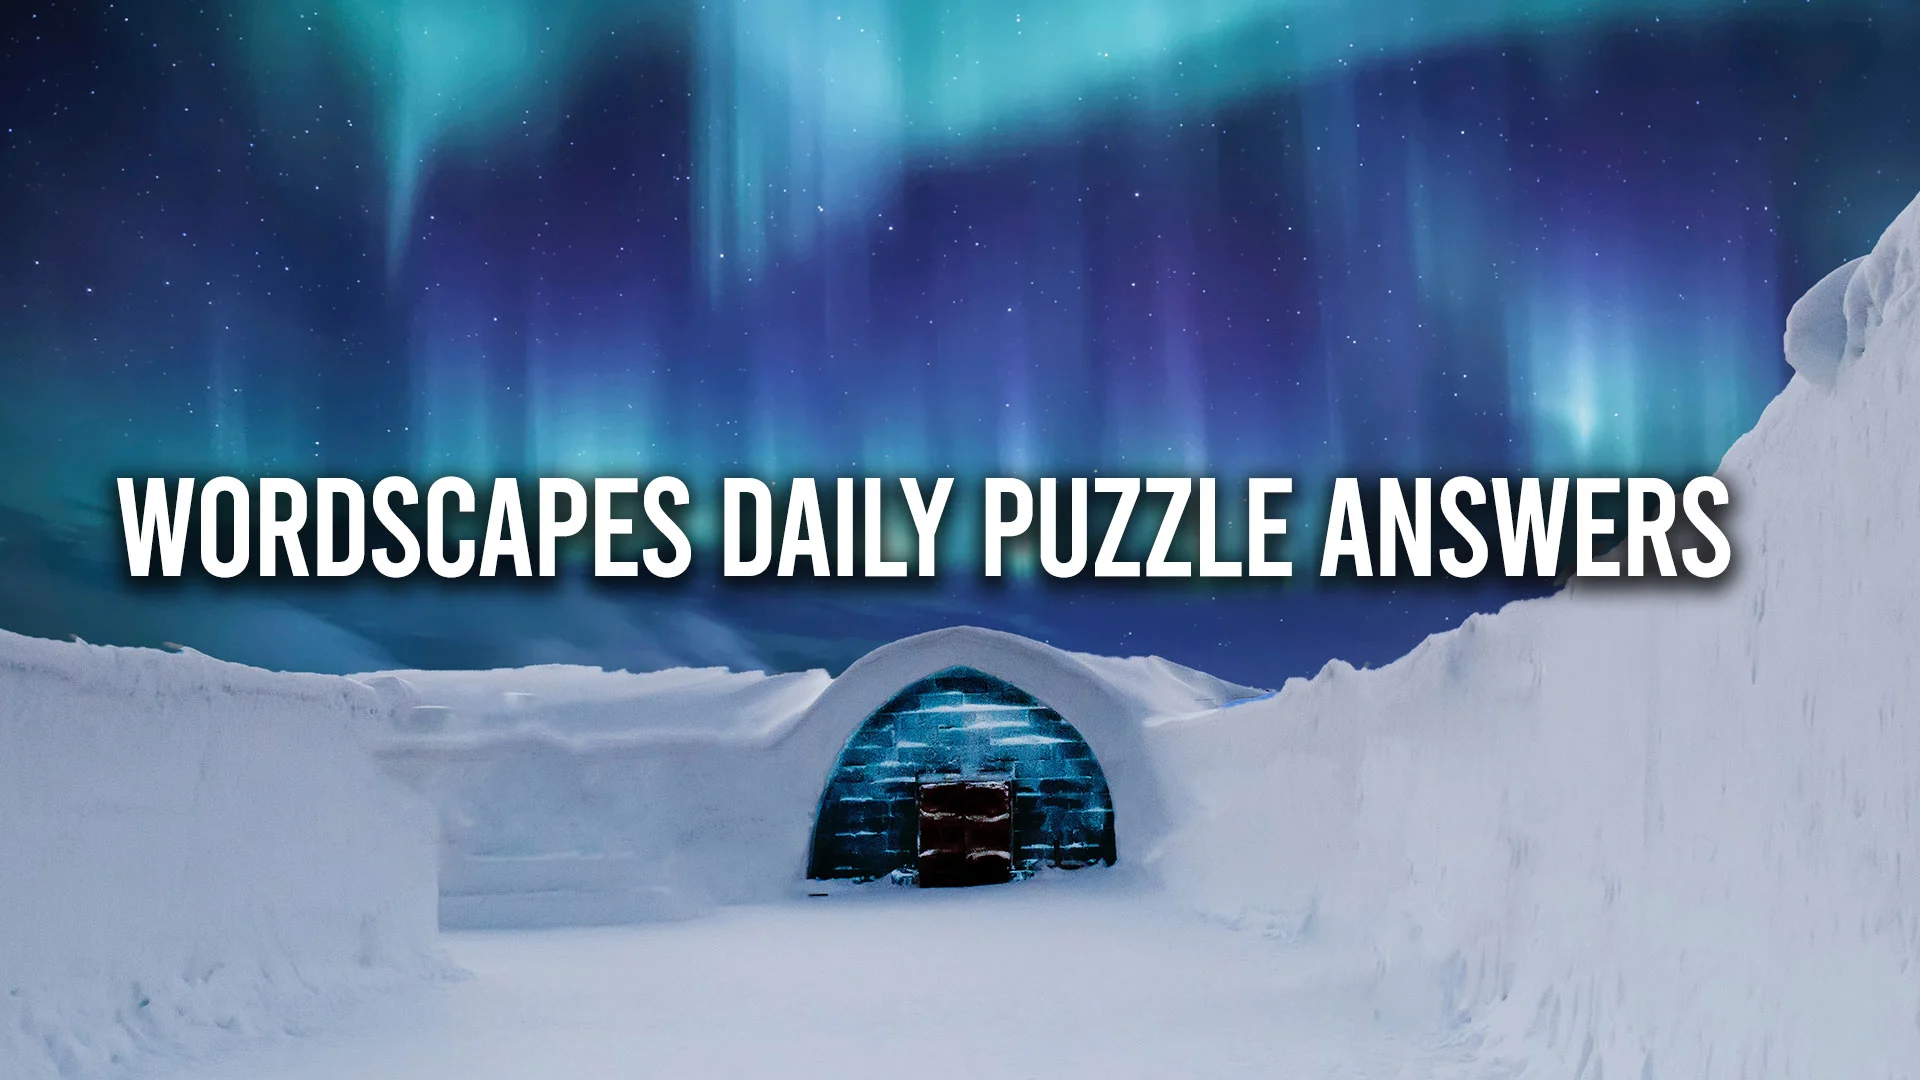 Wordscapes Daily Puzzle Answers for January 30 2023